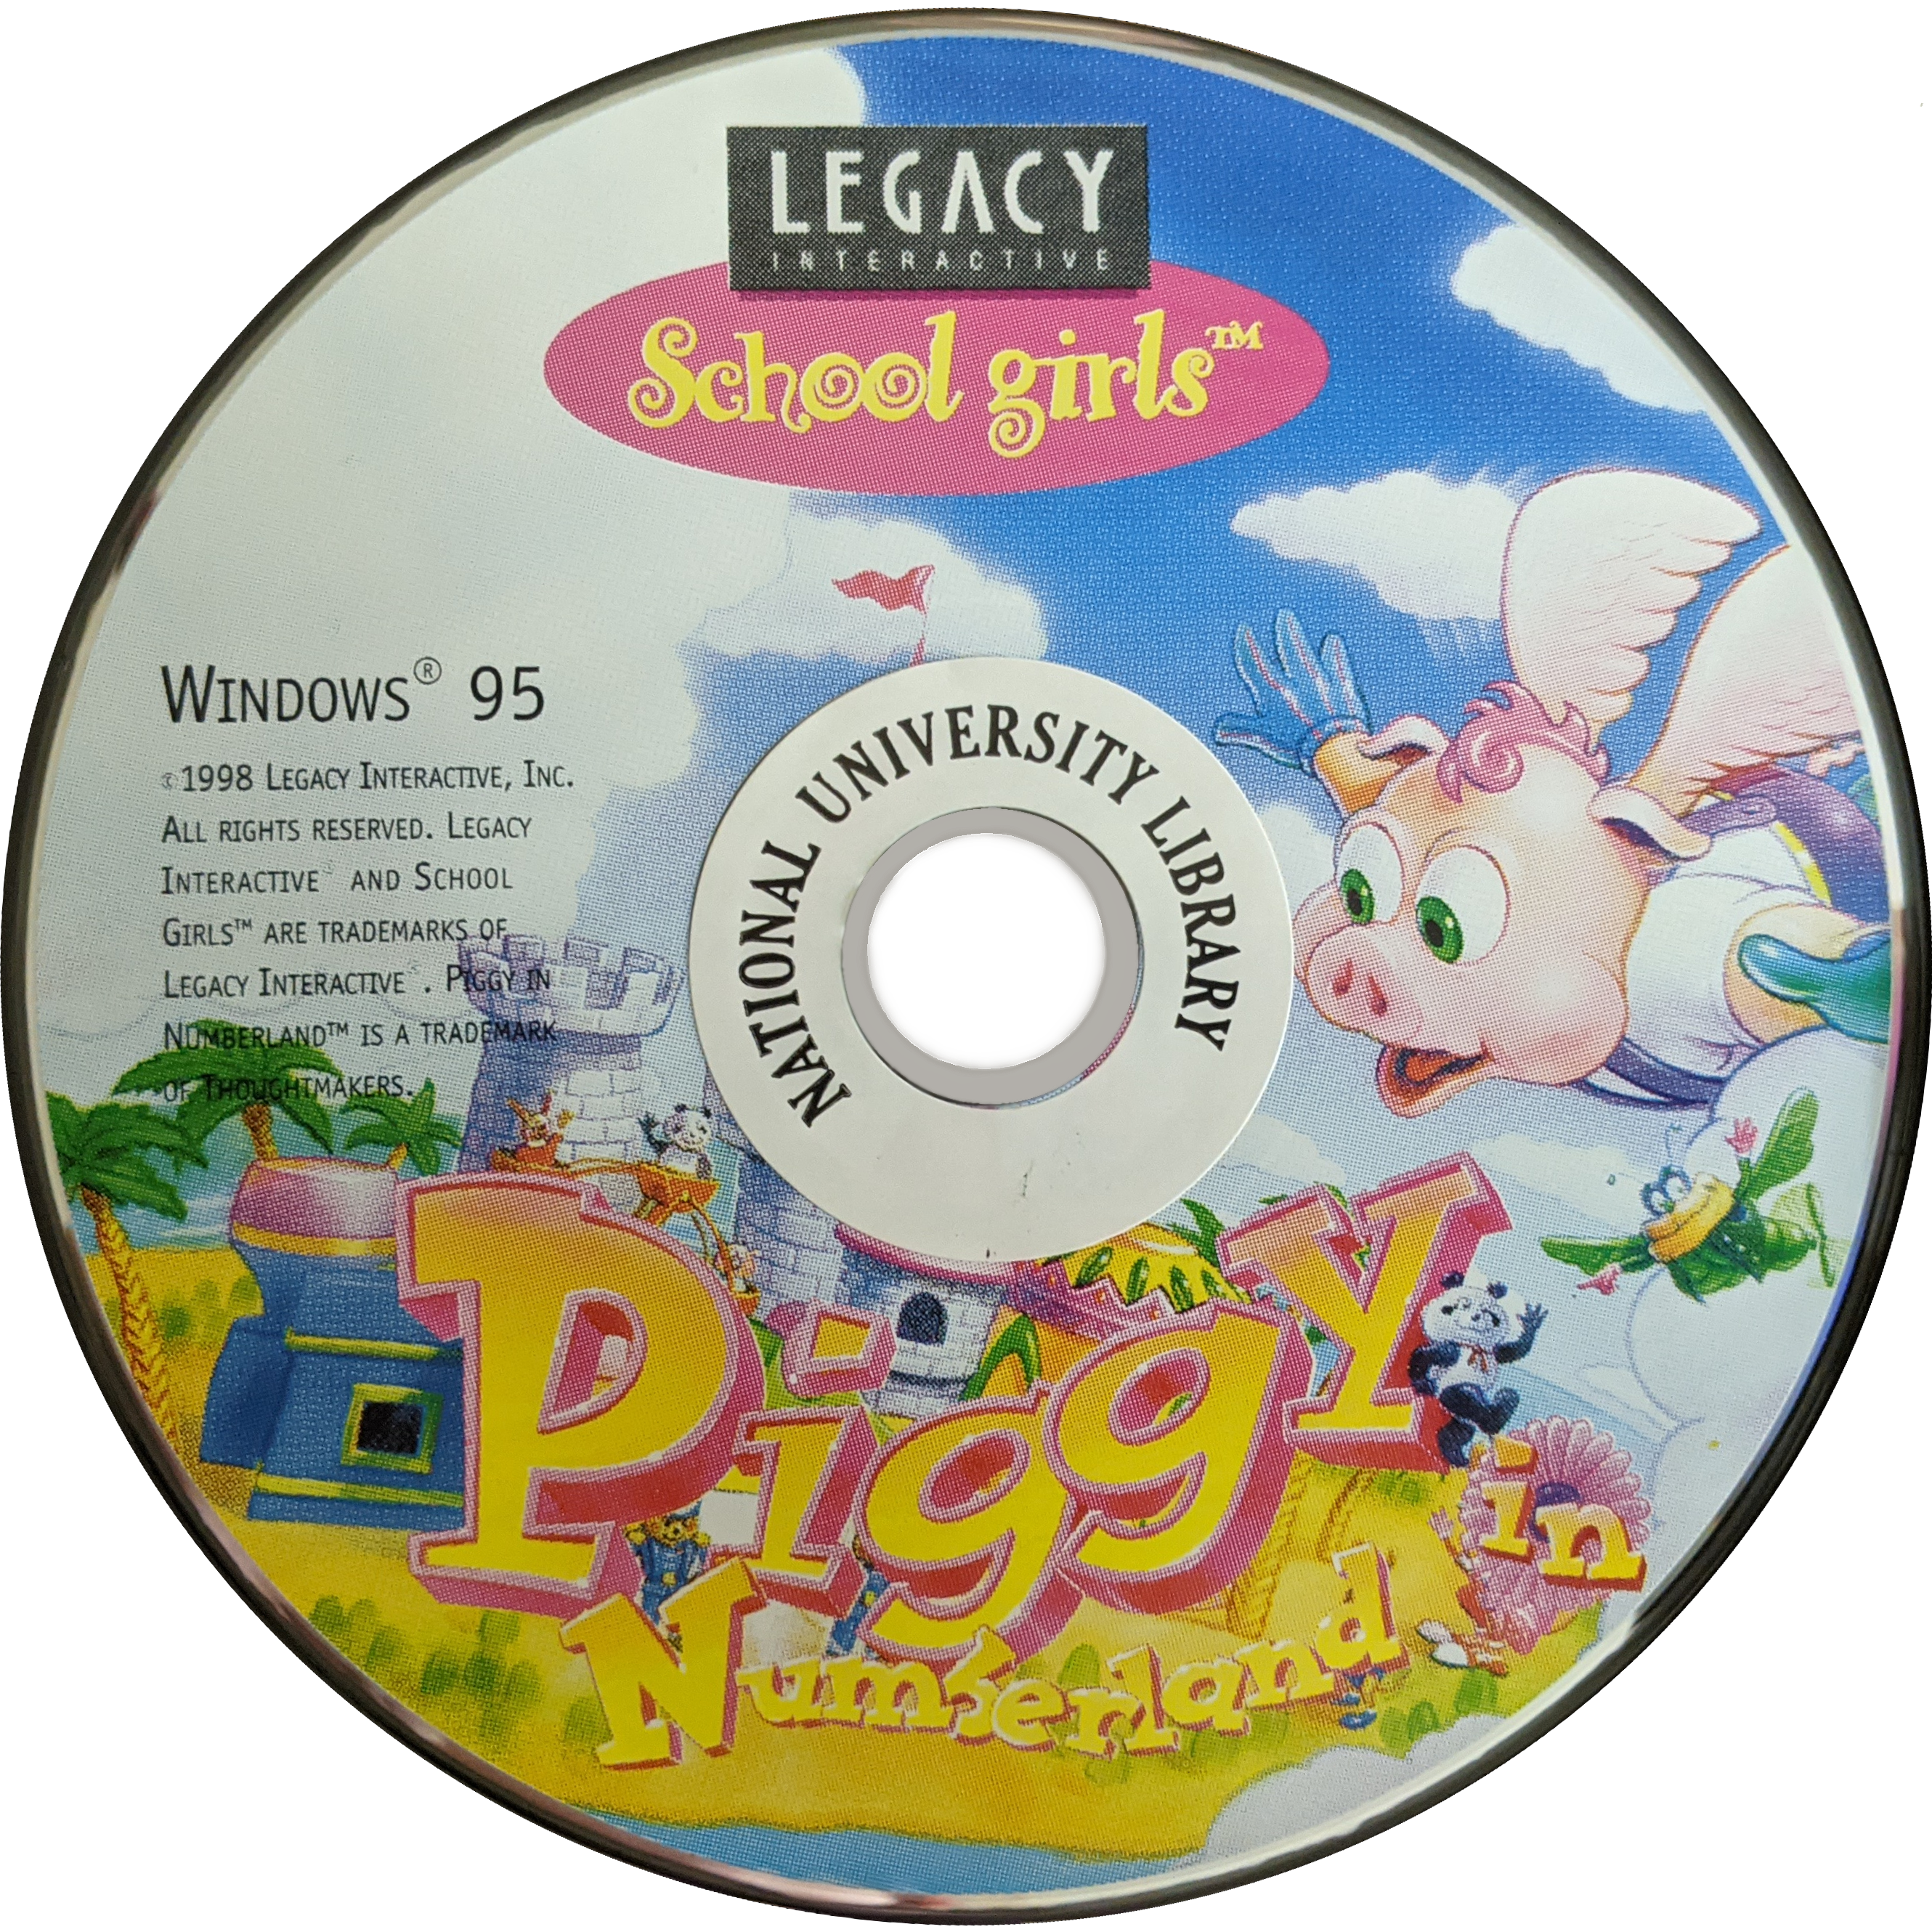 the disc art for Piggy in Numberland. it features a pig with wings flying through the sky over a castle and the title